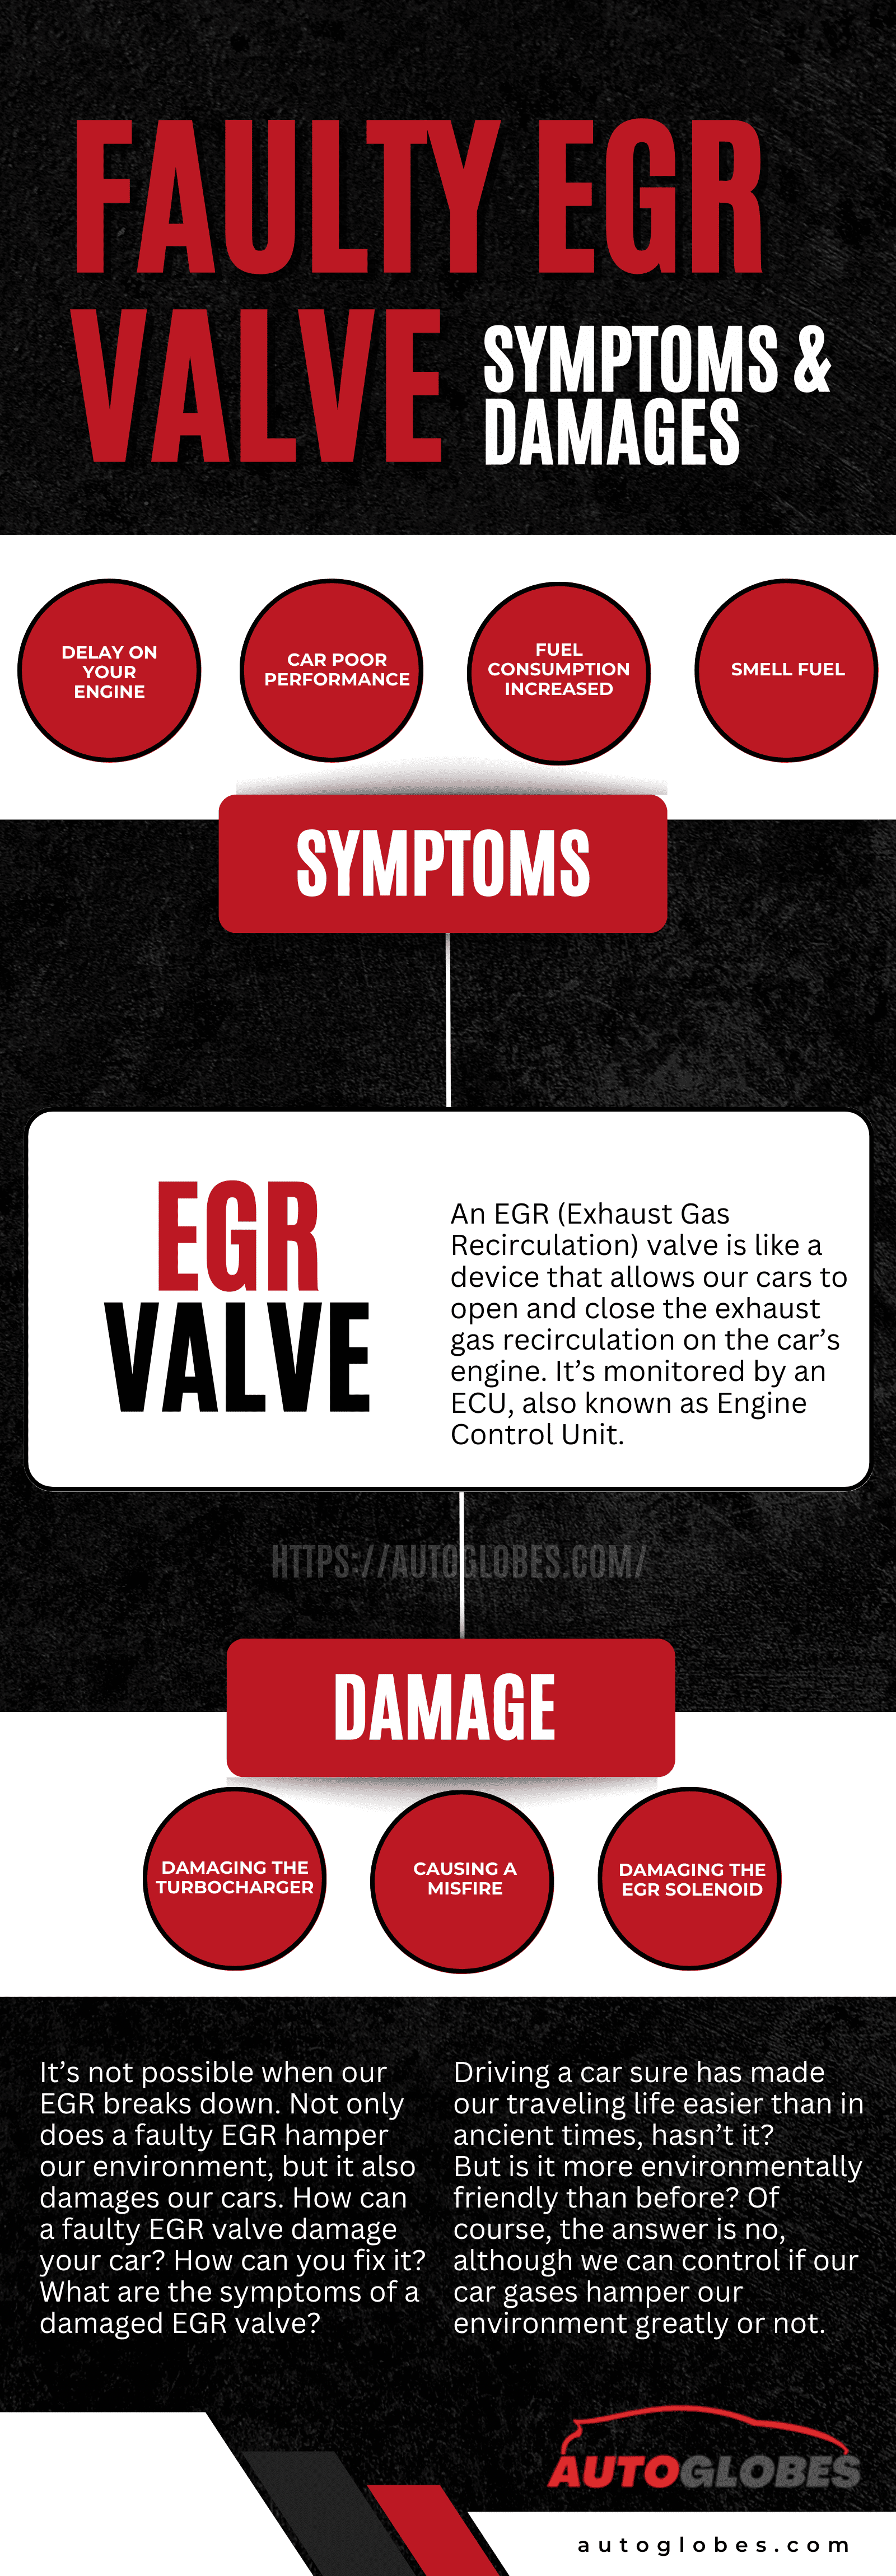 How A Faulty EGR Valve Damage Your Car Infographic